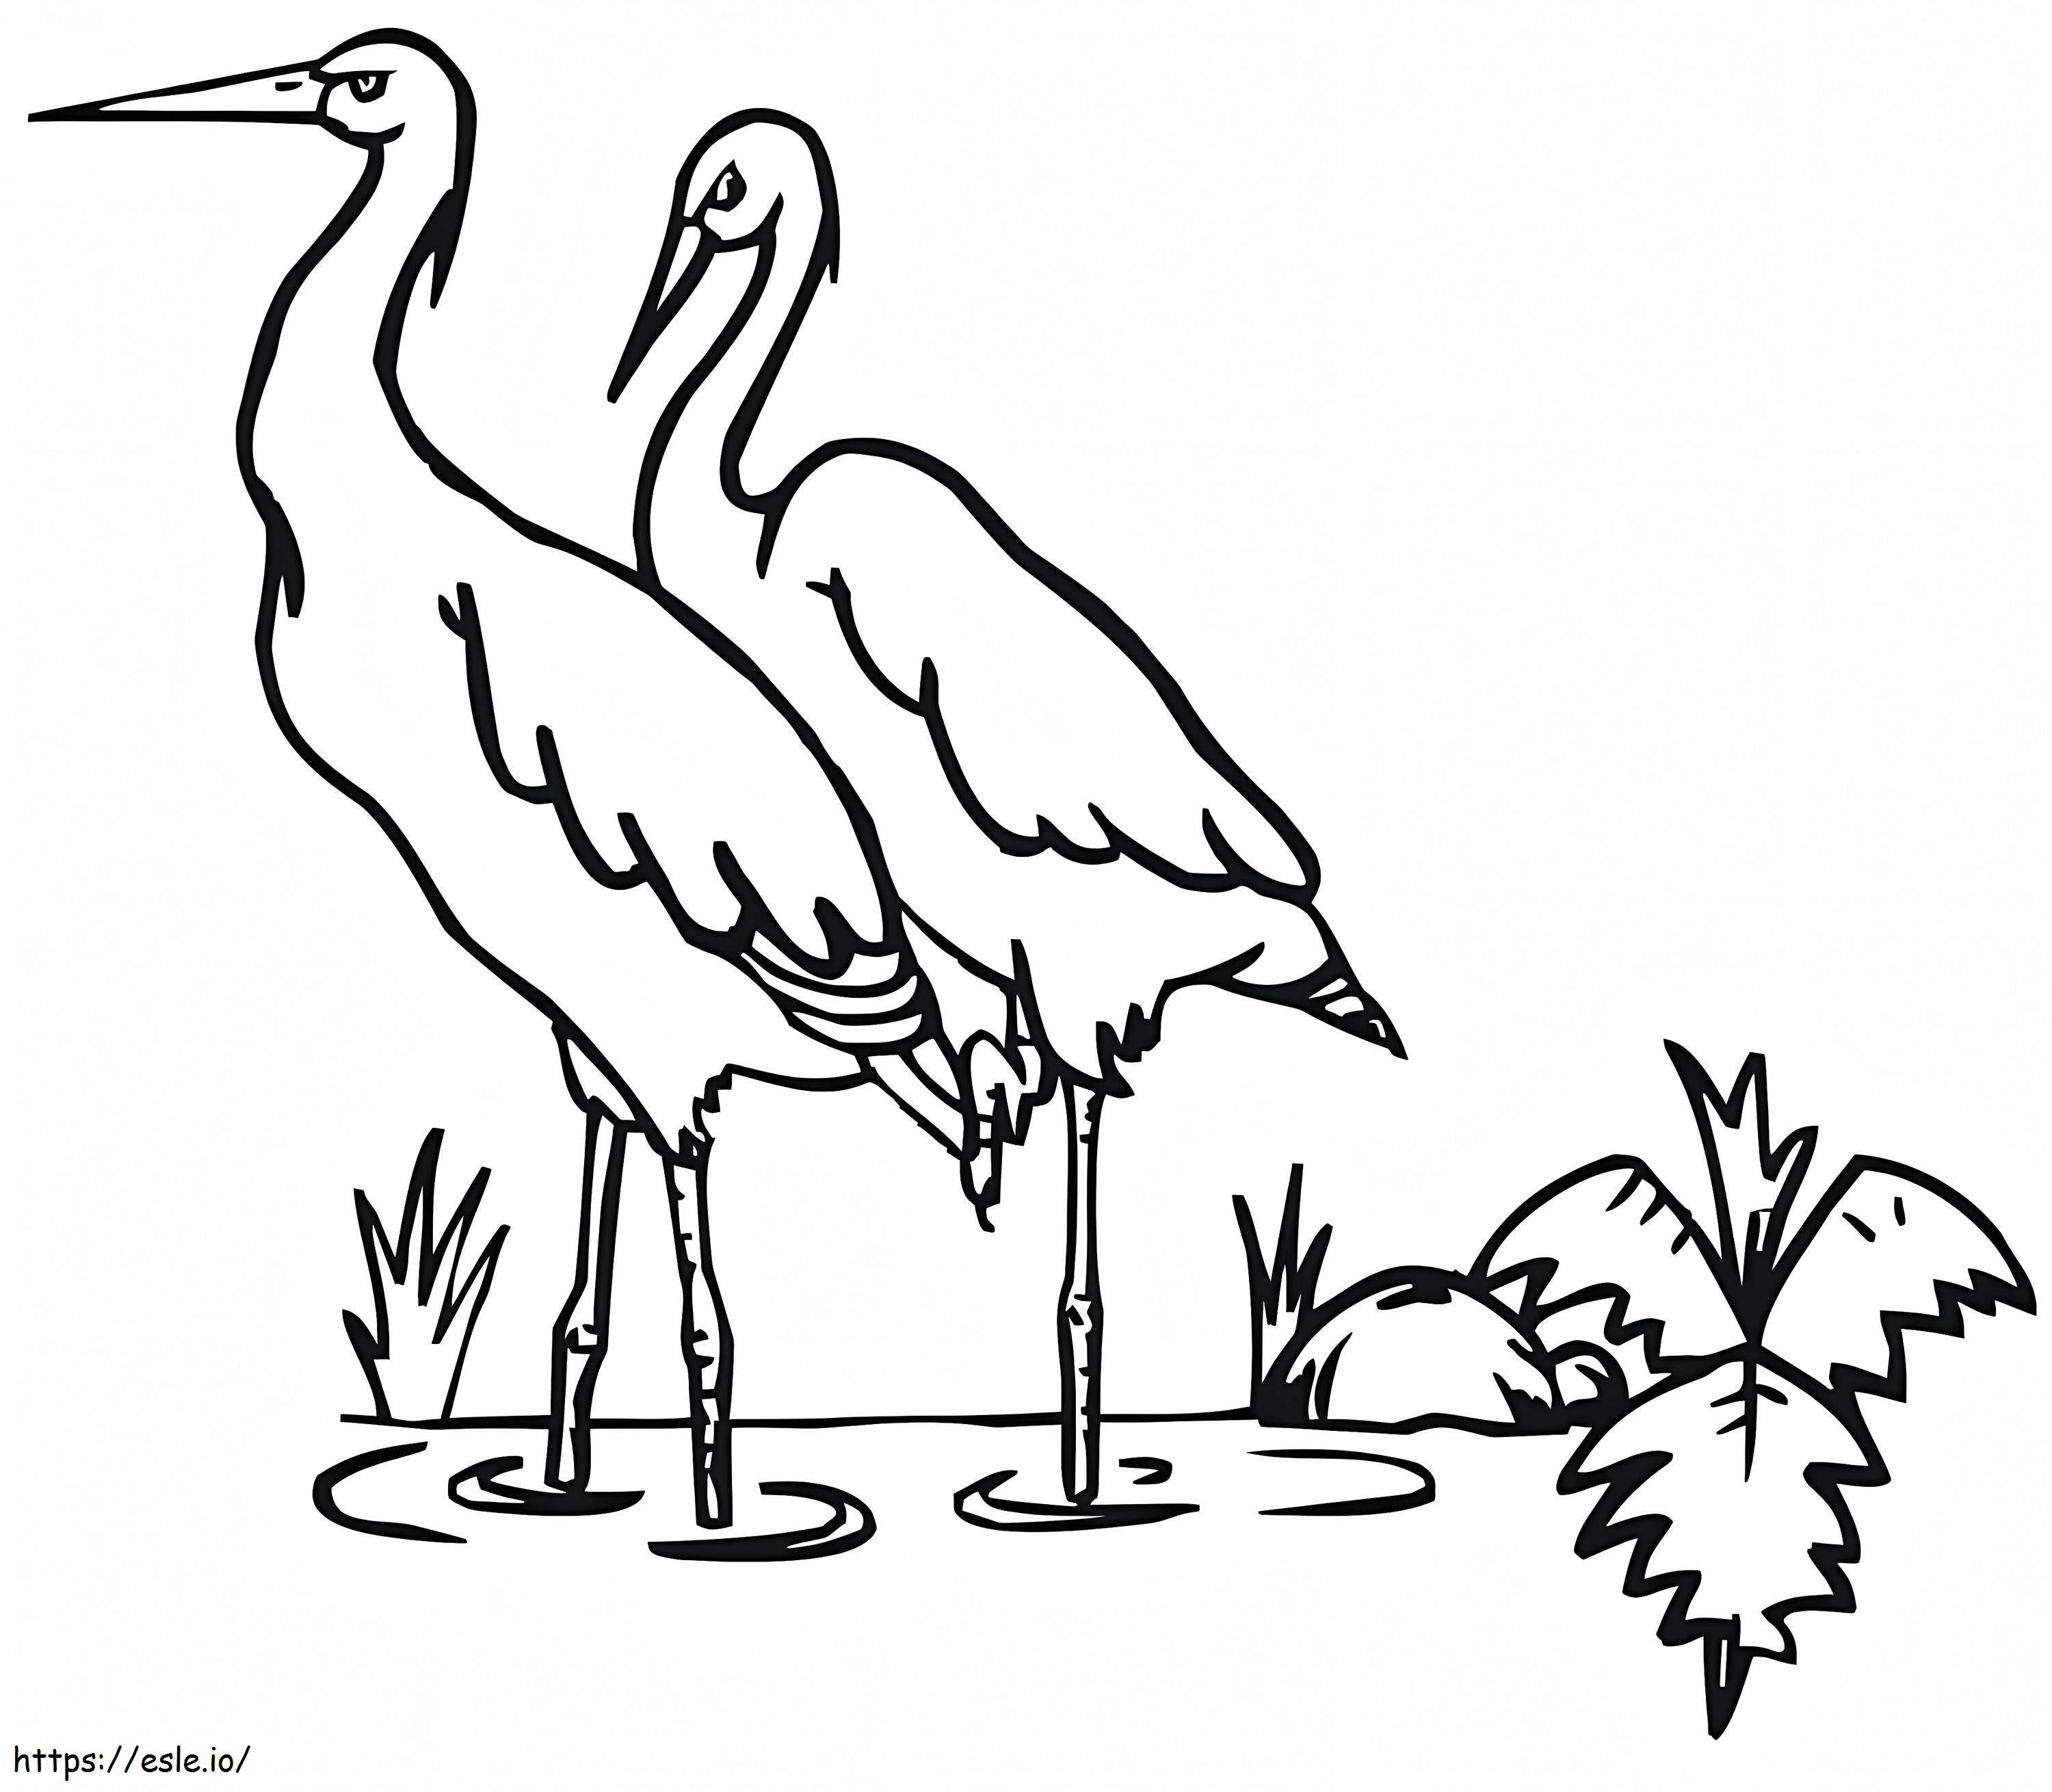 Two Storks coloring page